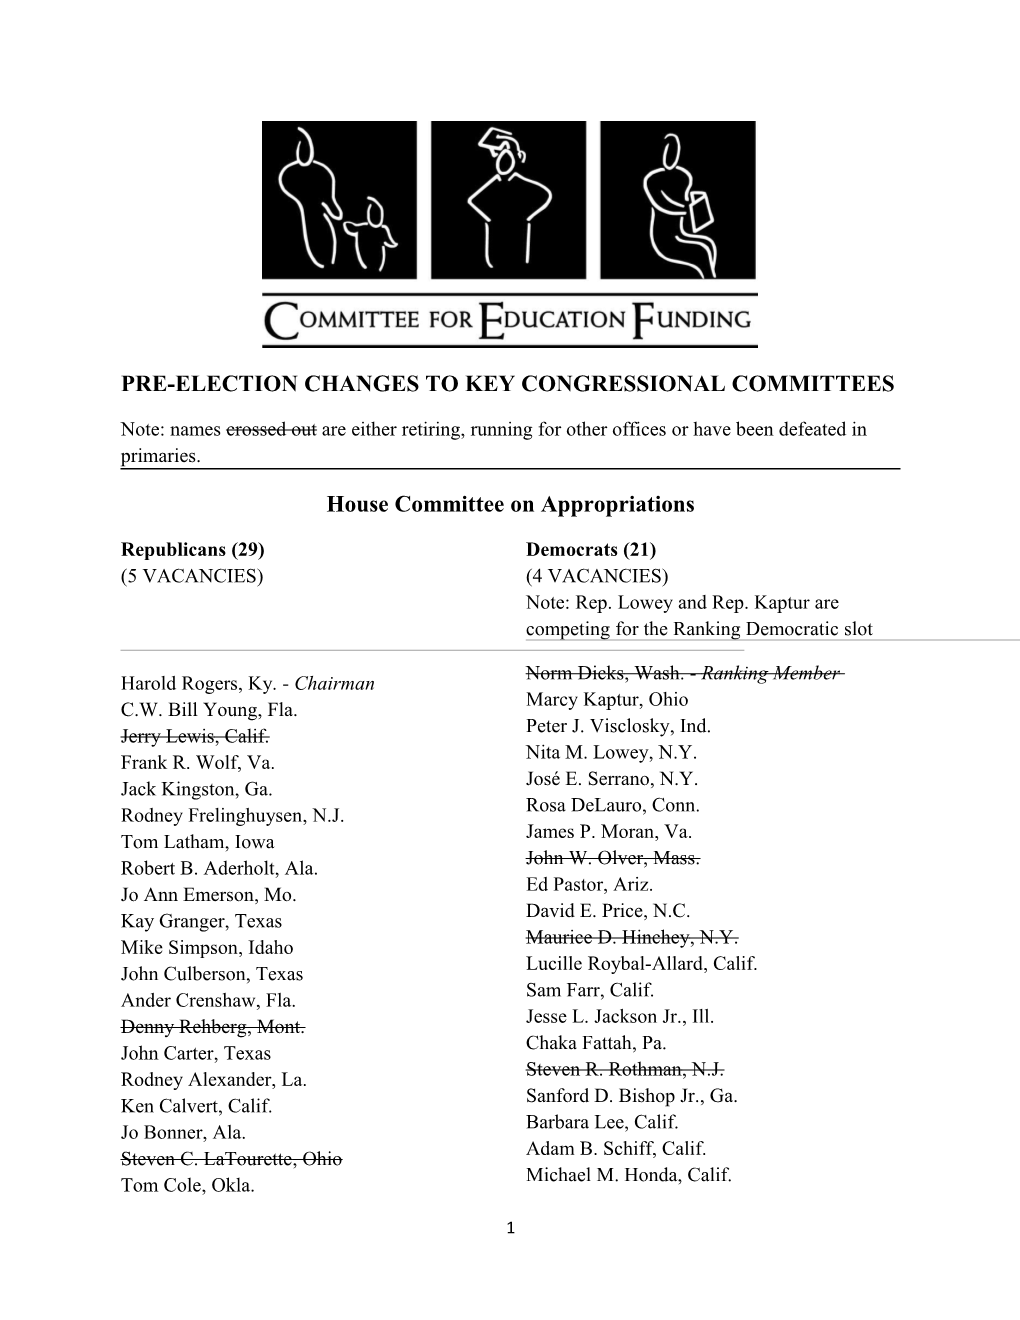 Pre-Electionchanges to Key Congressional Committees